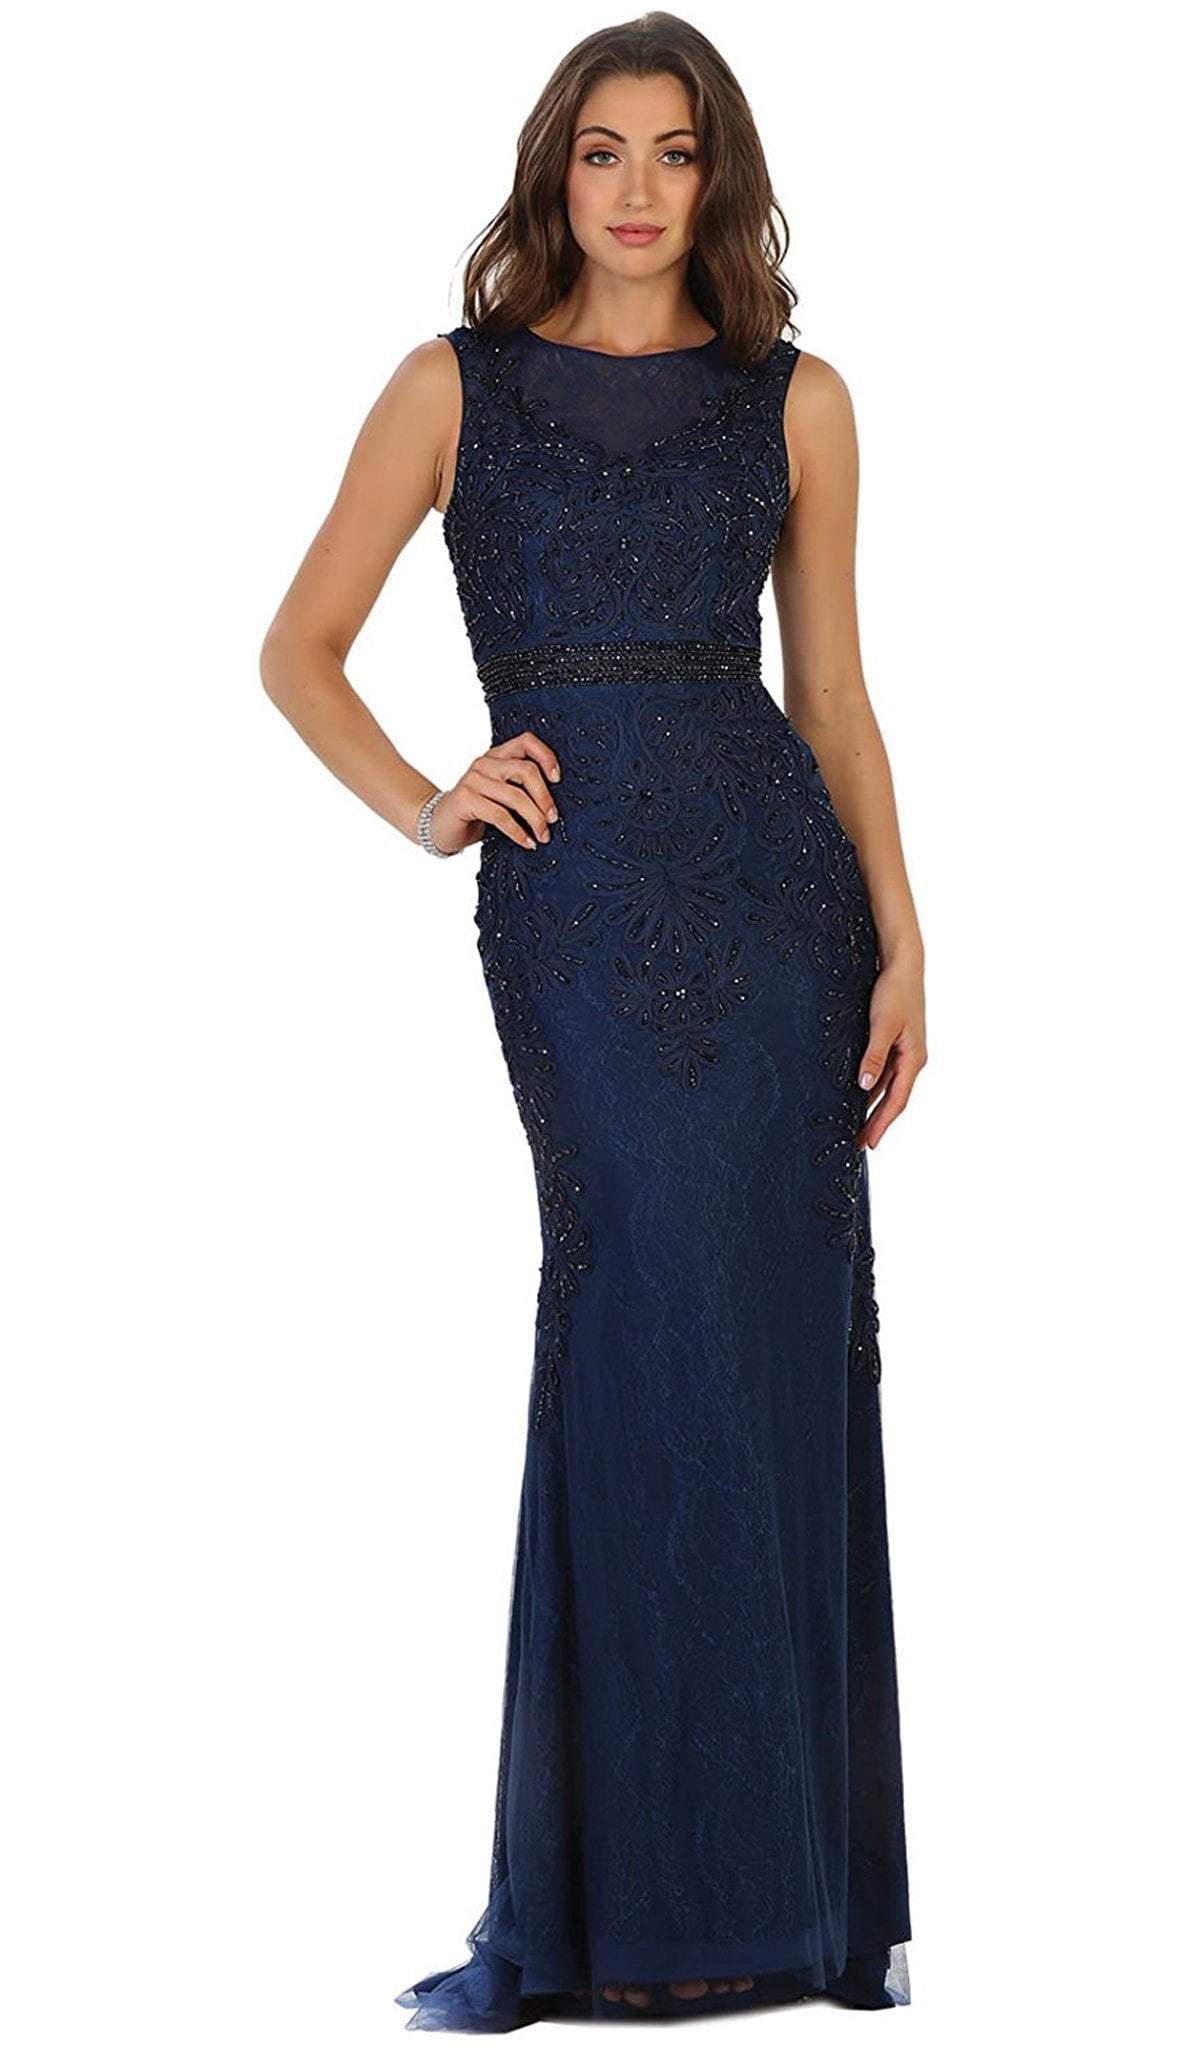 May Queen - Bedazzled Sheer Bateau Sheath Evening Dress Evening Dresses 6 / Navy